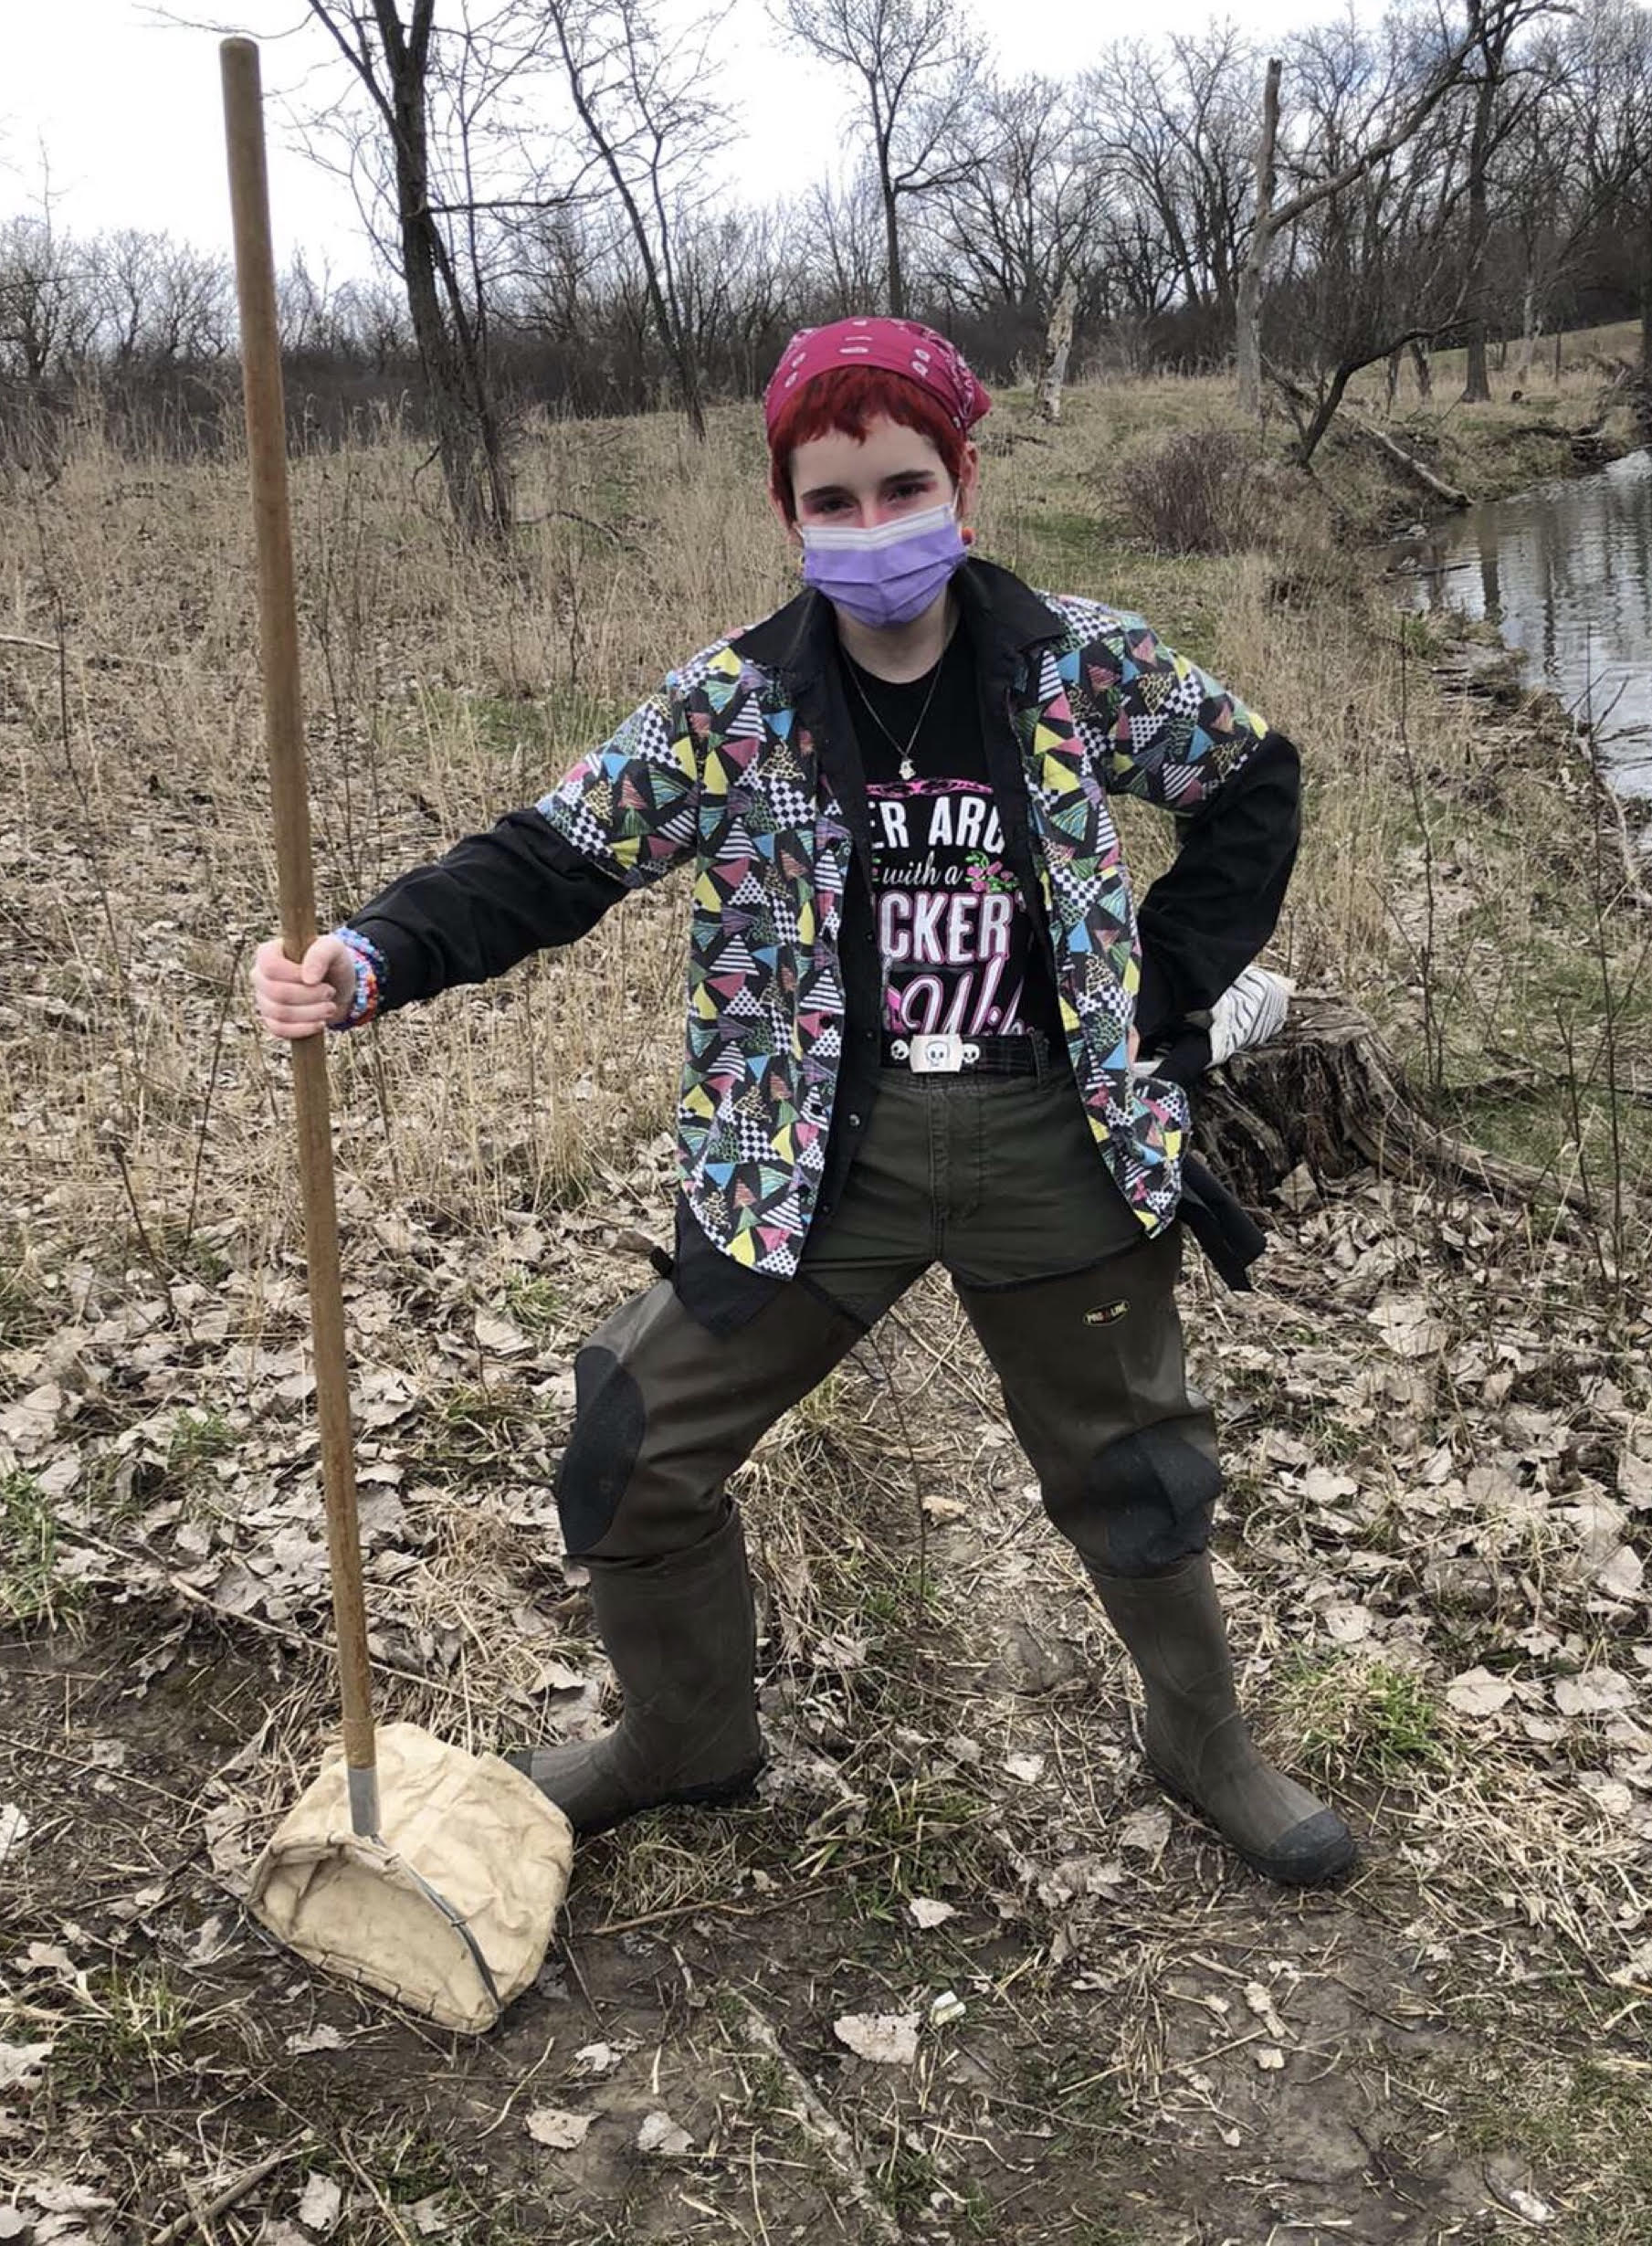 Image of a person in the woods holding a tool and standing with his hand on his hip. He has short red hair and is wearing a red bandanna over it. He is also wearing a purple surgical mask, a colorful button up shirt over a long sleeve shirt, and green pants with mud boots.